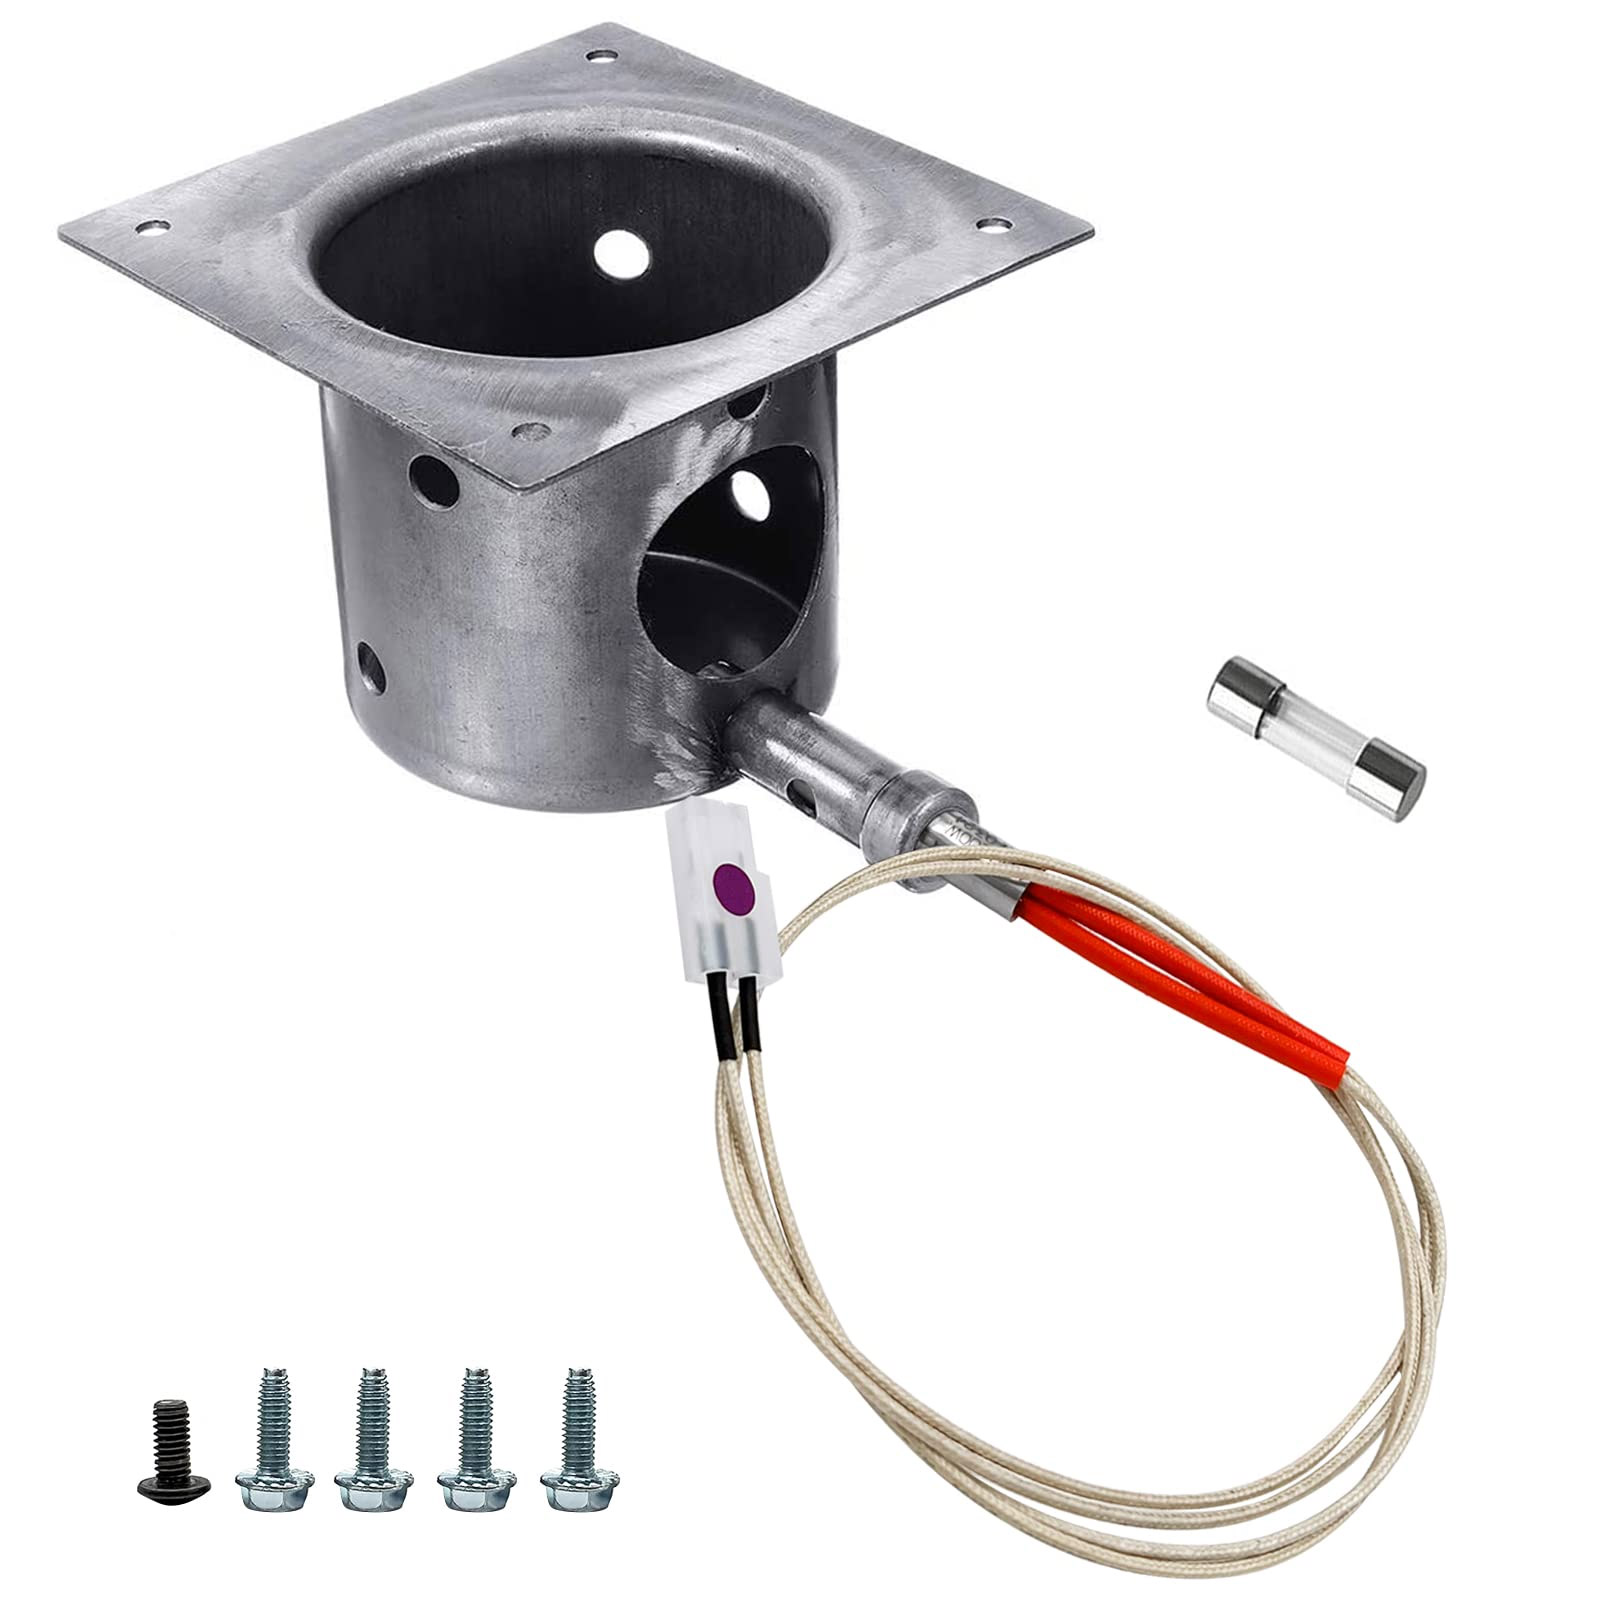 Replacement Grills Parts for Pit Boss Fire Pot and Hot Rod Igniter Kit-YAOAWE